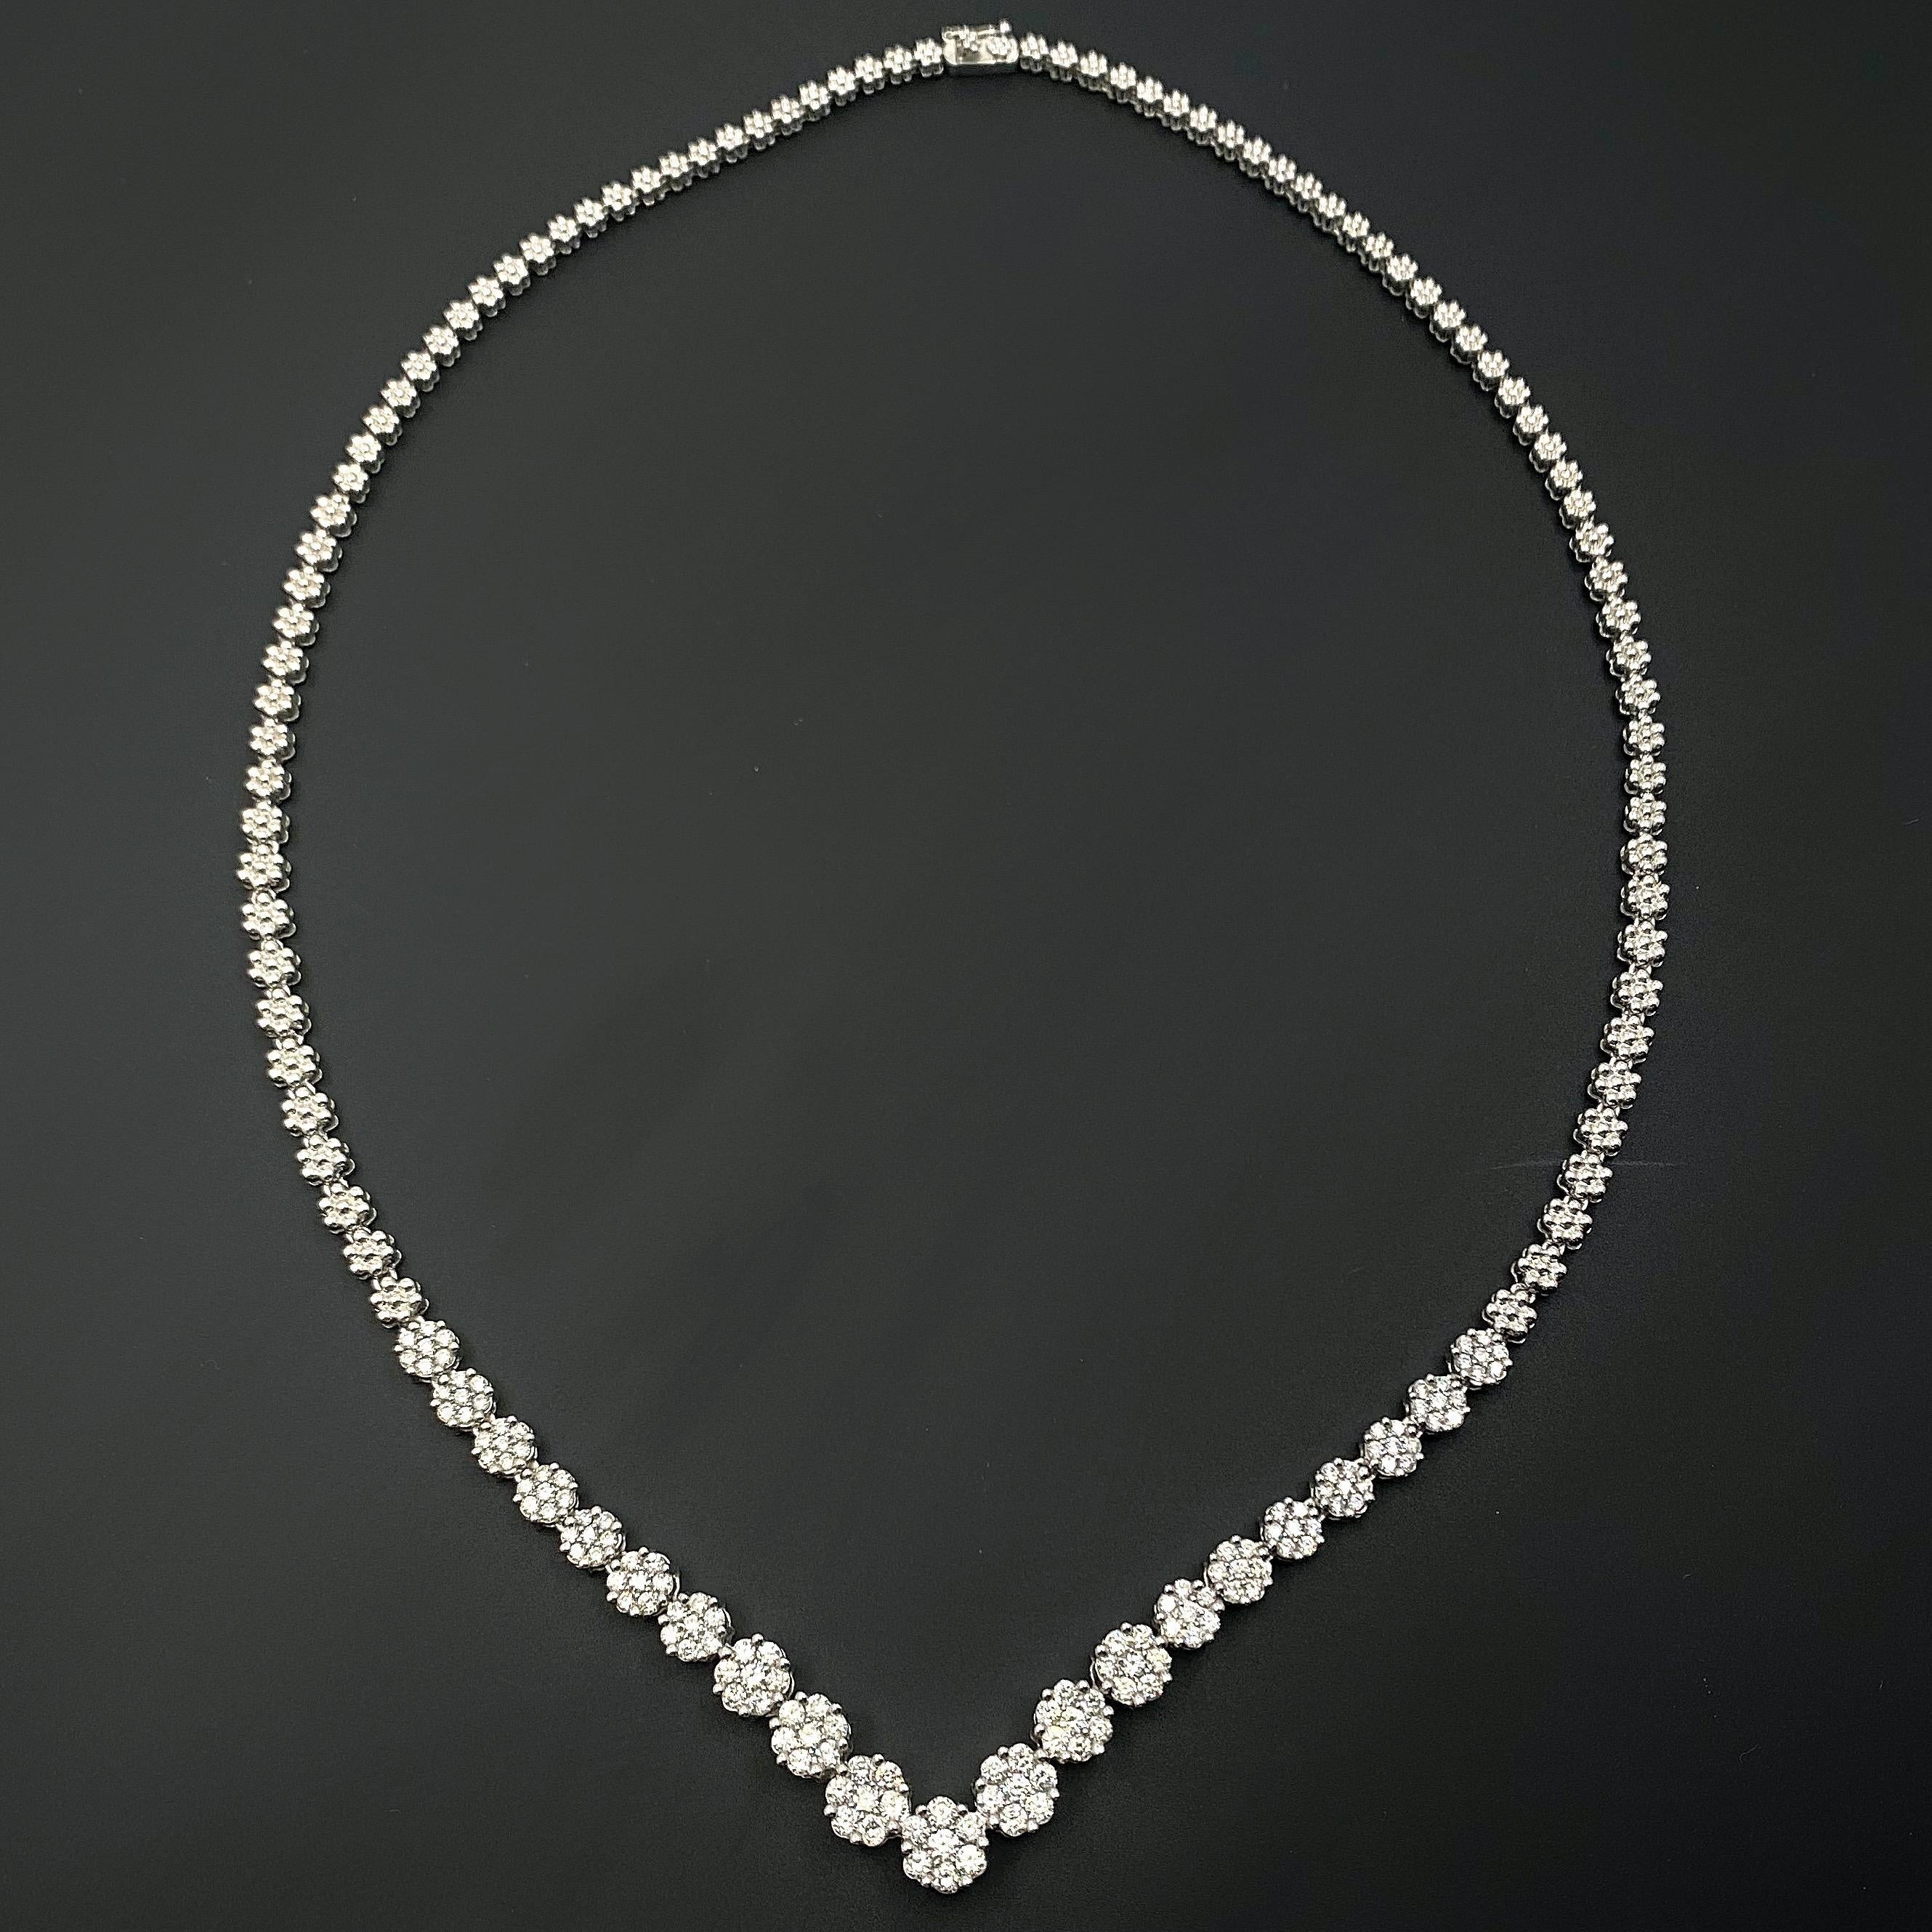 Diamond Flower Contoured V Tennis Necklace
Style:  Contoured
Metal:  14kt White Gold
Length:  18' inches 
TCW:  4.00 tcw
Main Diamond:  147 Round Brilliant Diamond 4.00 tcw
Color & Clarity:  G - H / SI2 - SI3
Hallmark:  14K
Includes:  Certified